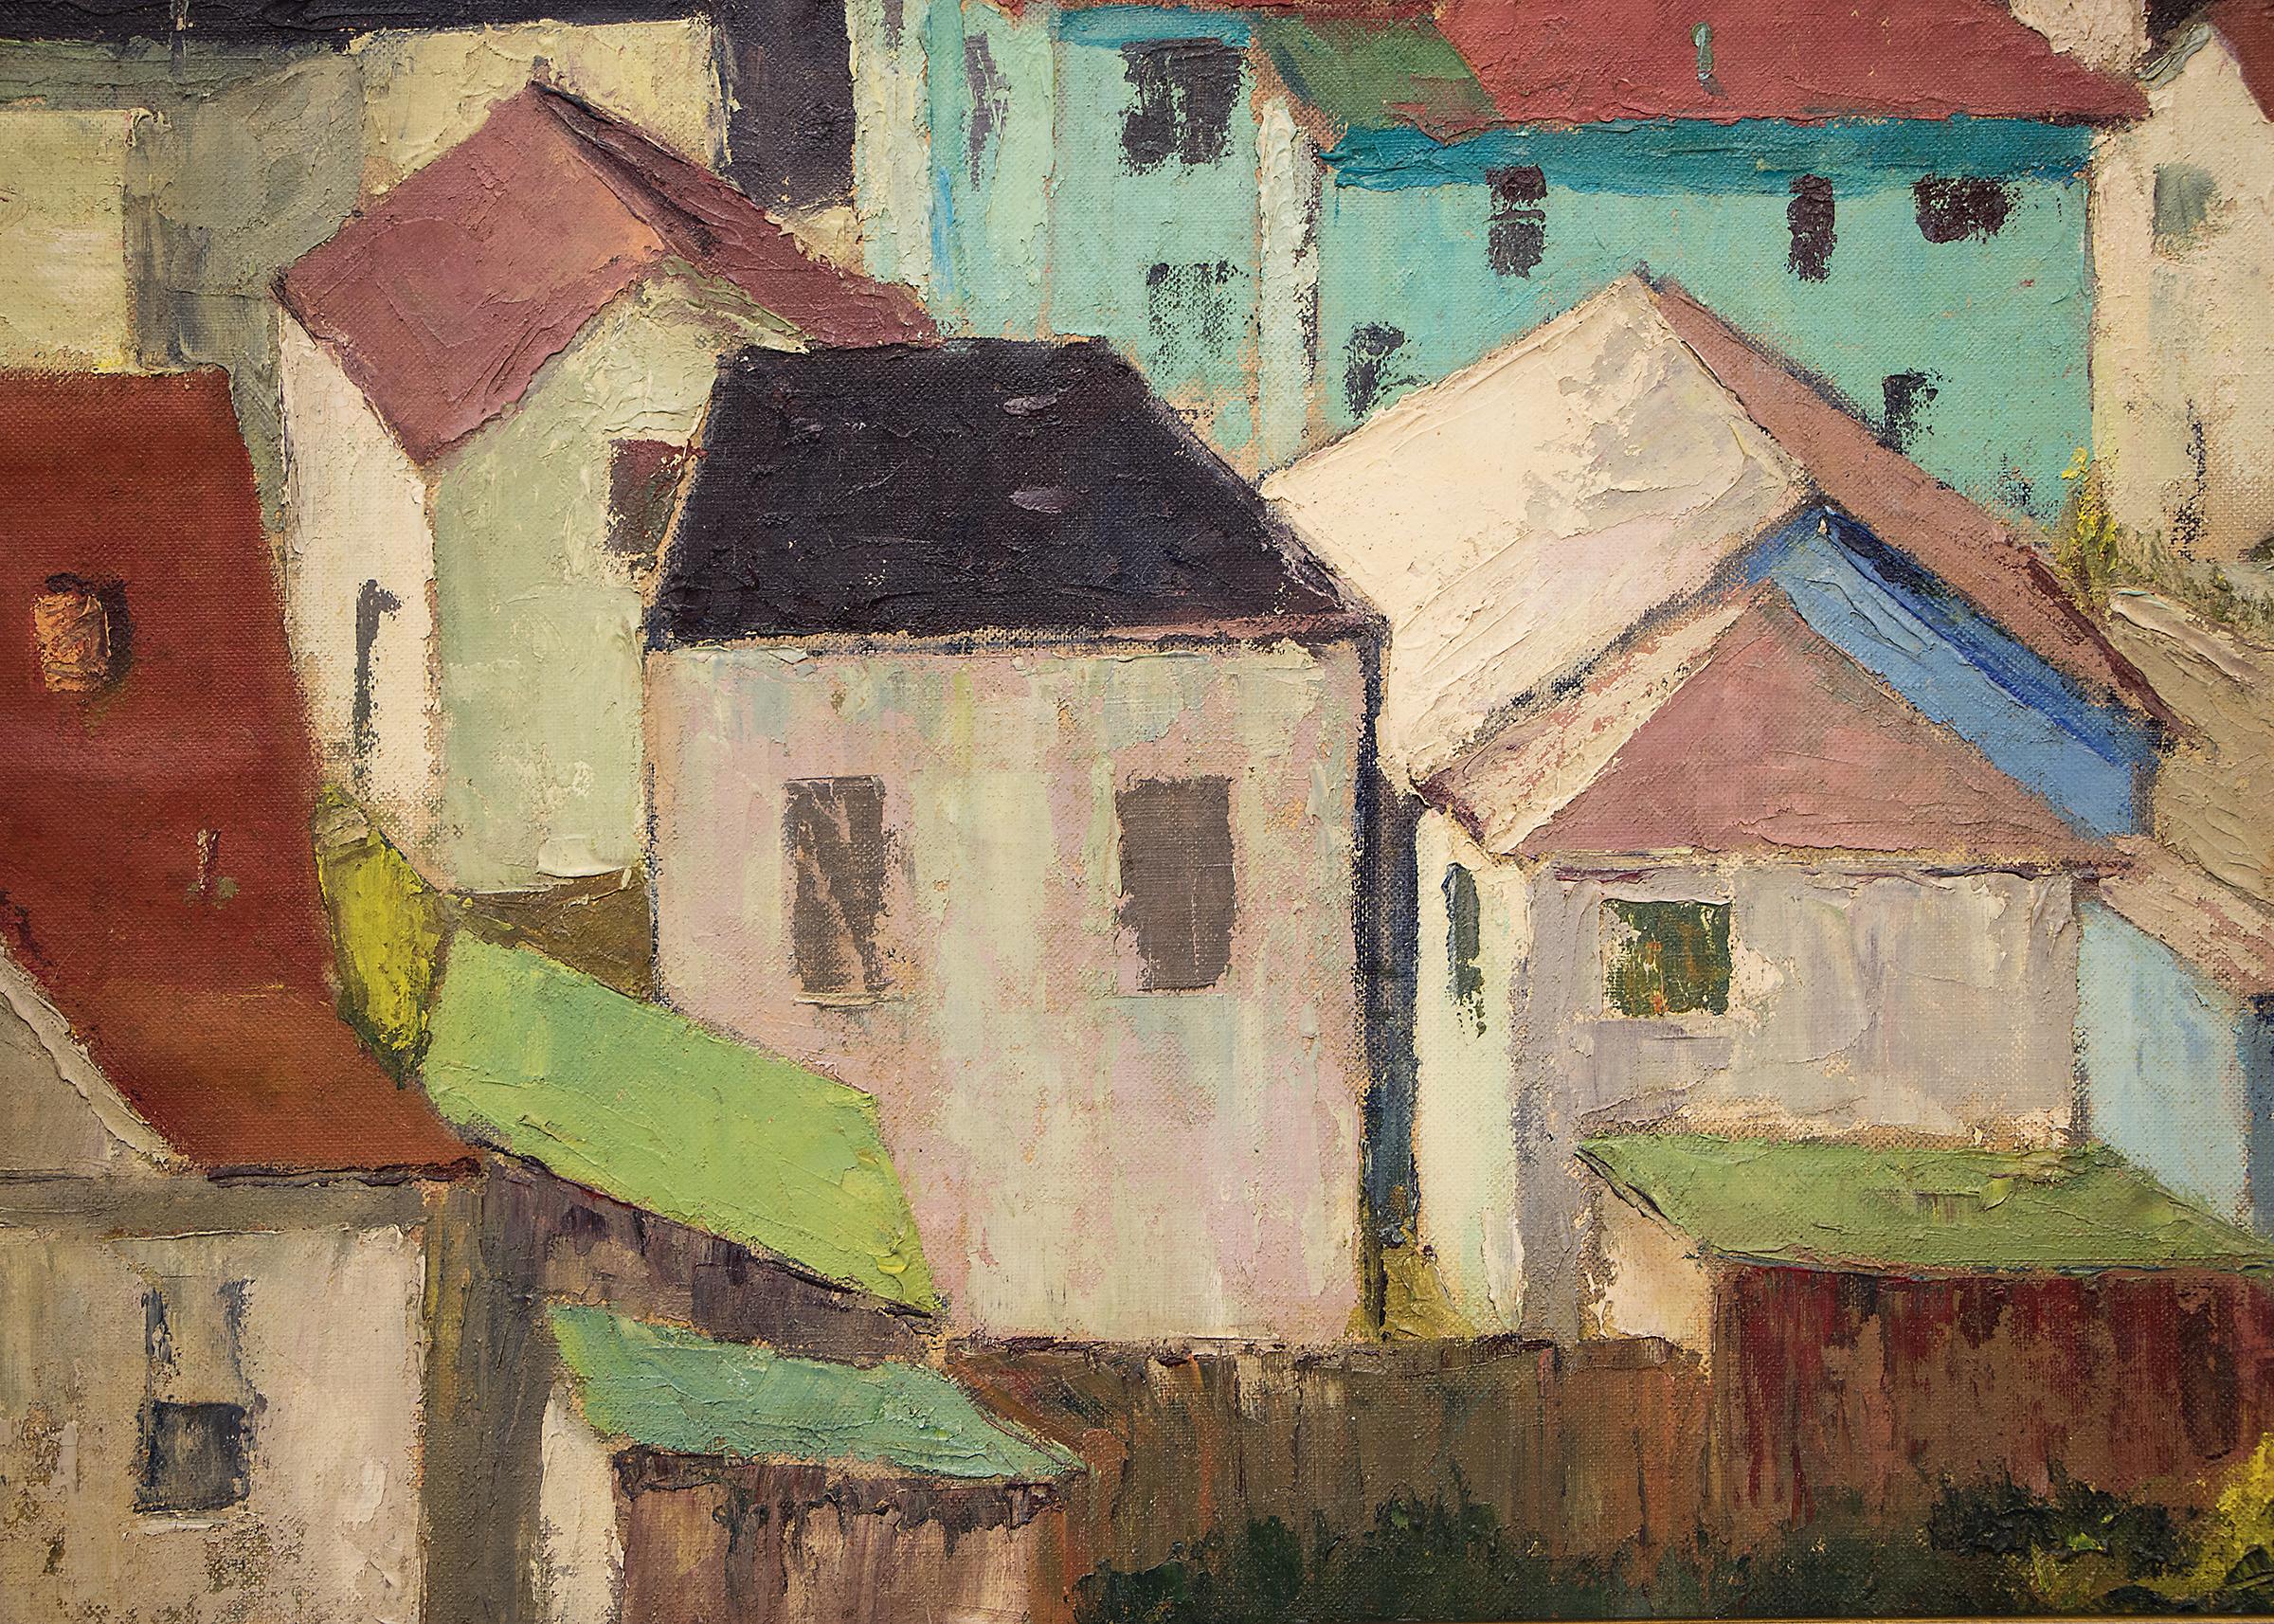 Capitola Roofs (California) - American Modern Painting by Jon Blanchette